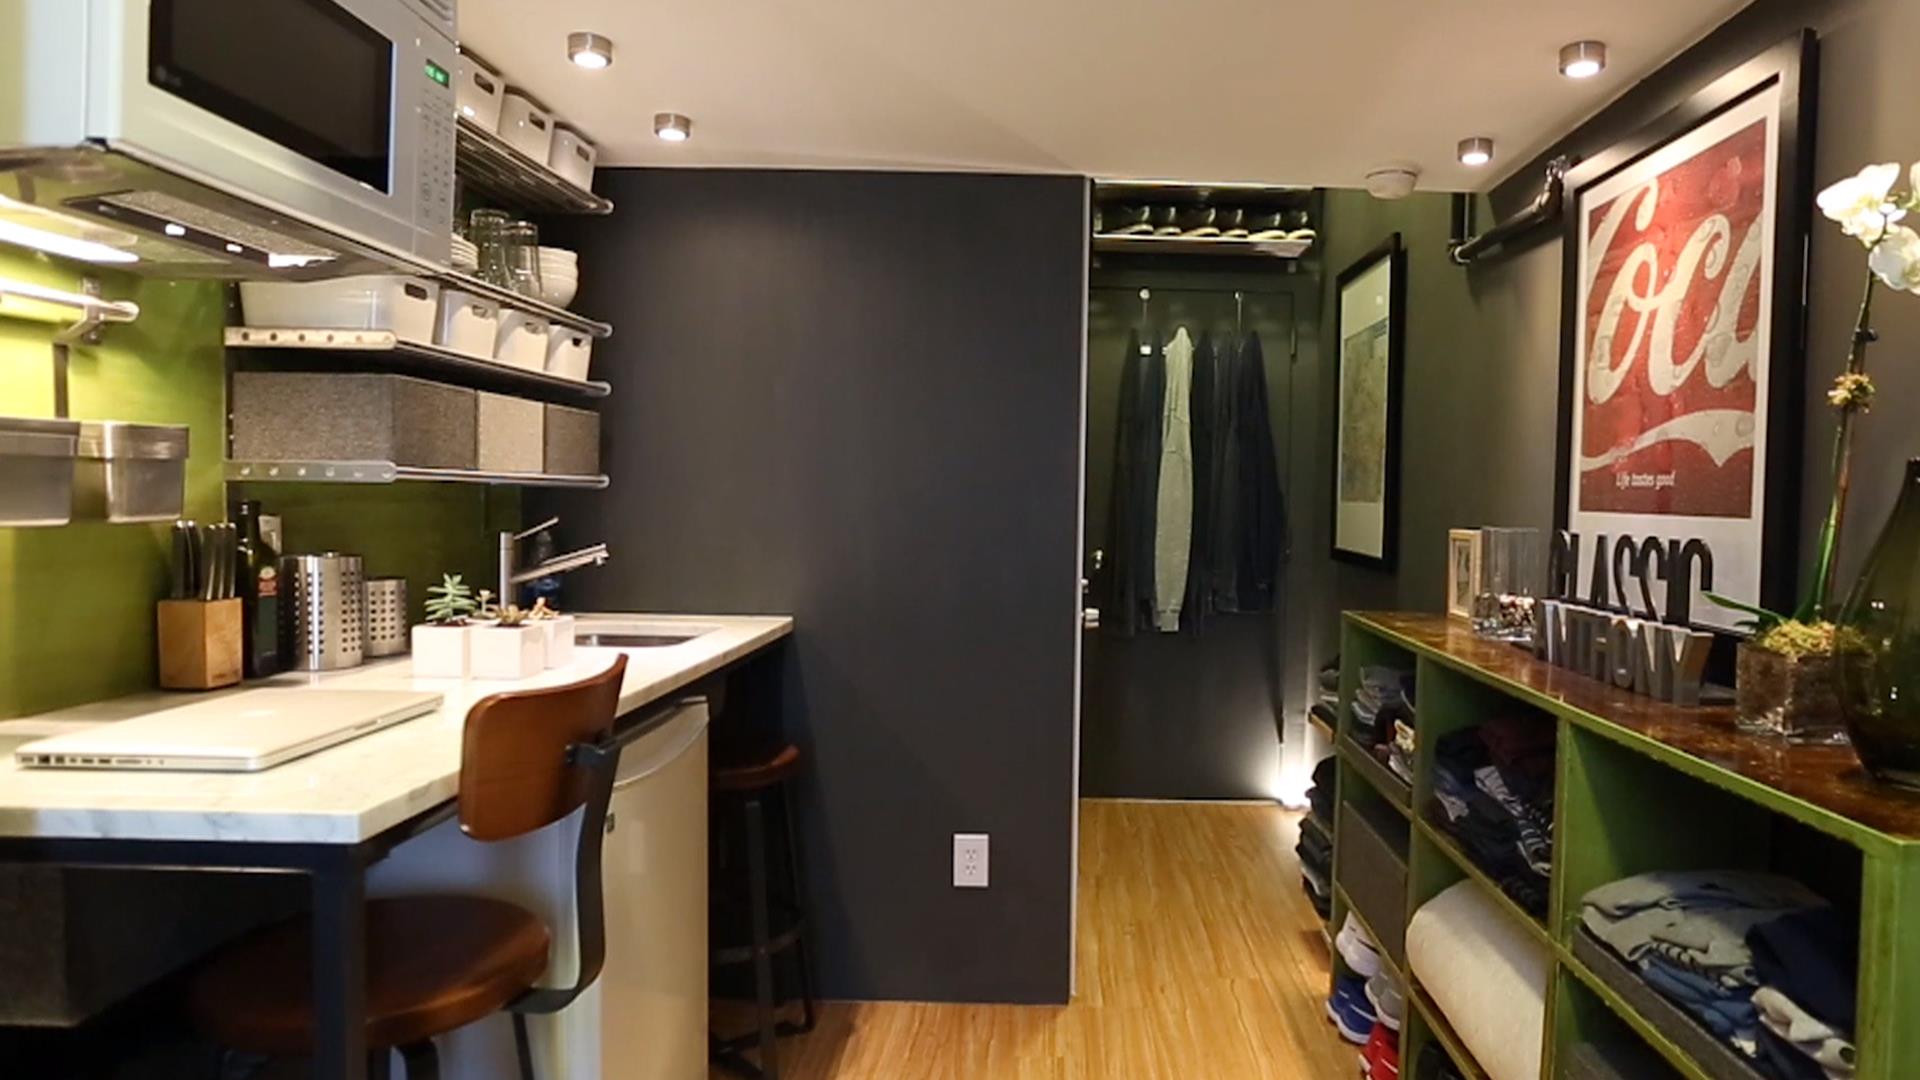 See how one man lives in a 150squarefoot apartment